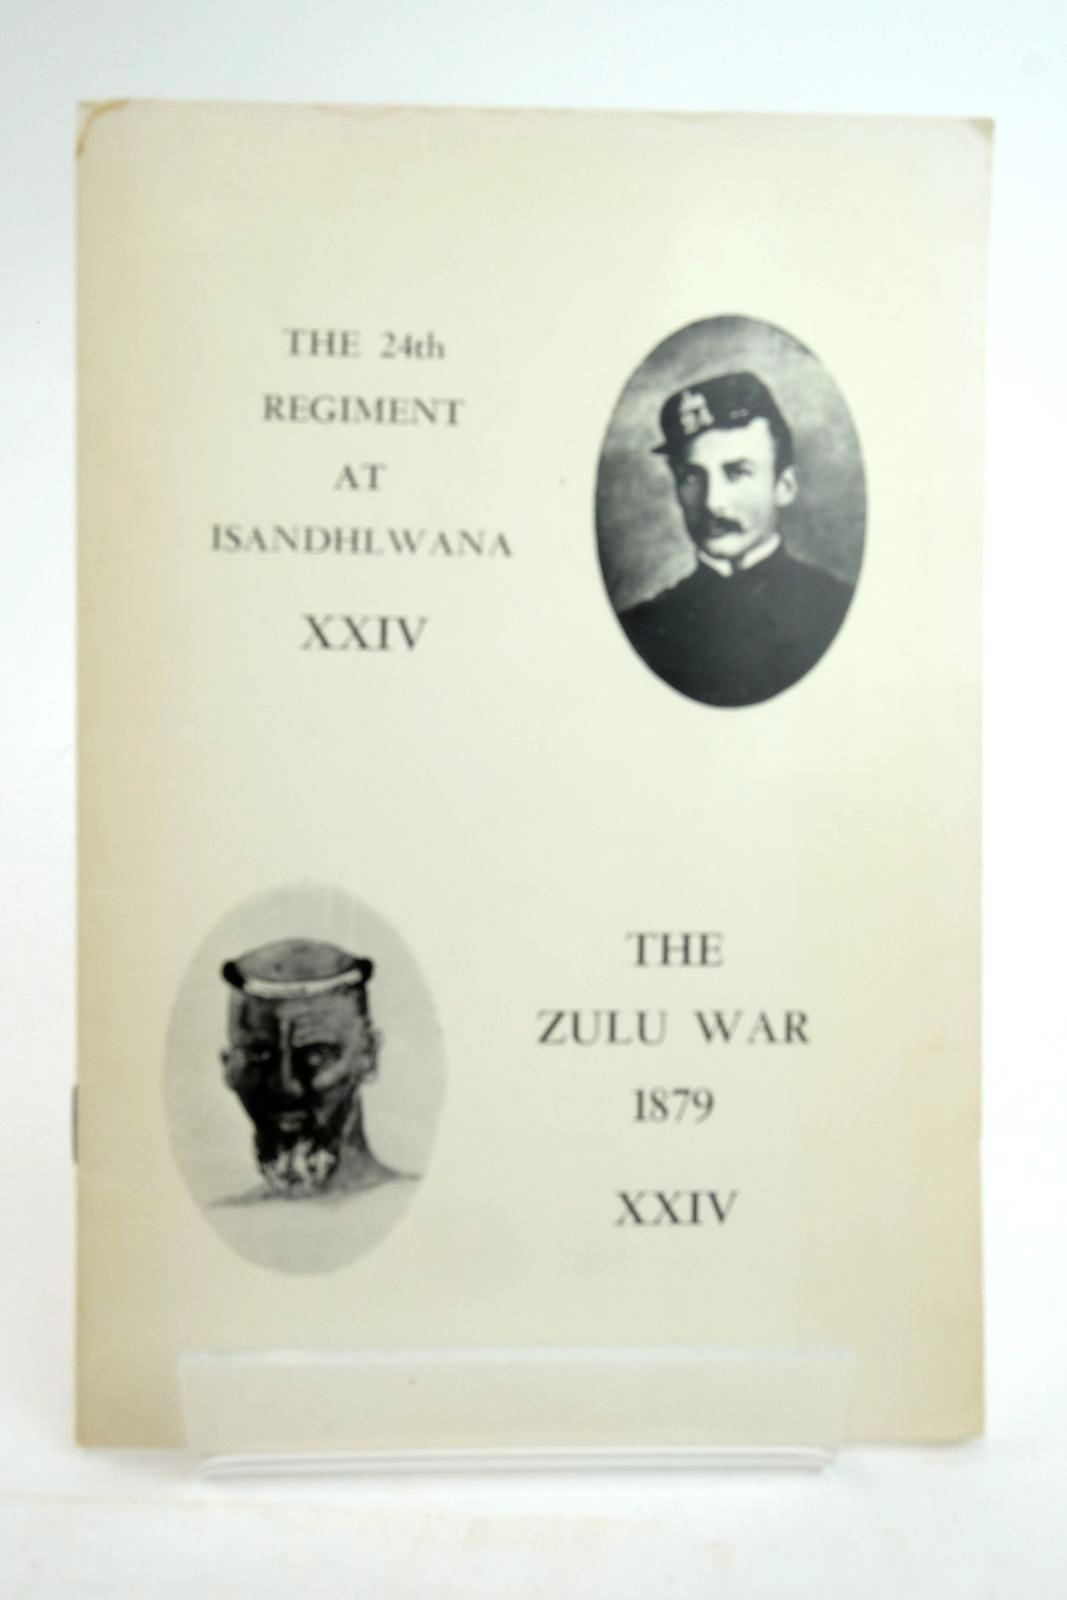 Photo of THE 24TH REGIMENT AT ISANDHLWANA XXIV THE ZULU WAR 1879 XXIV written by Emery, Frank (STOCK CODE: 2136593)  for sale by Stella & Rose's Books